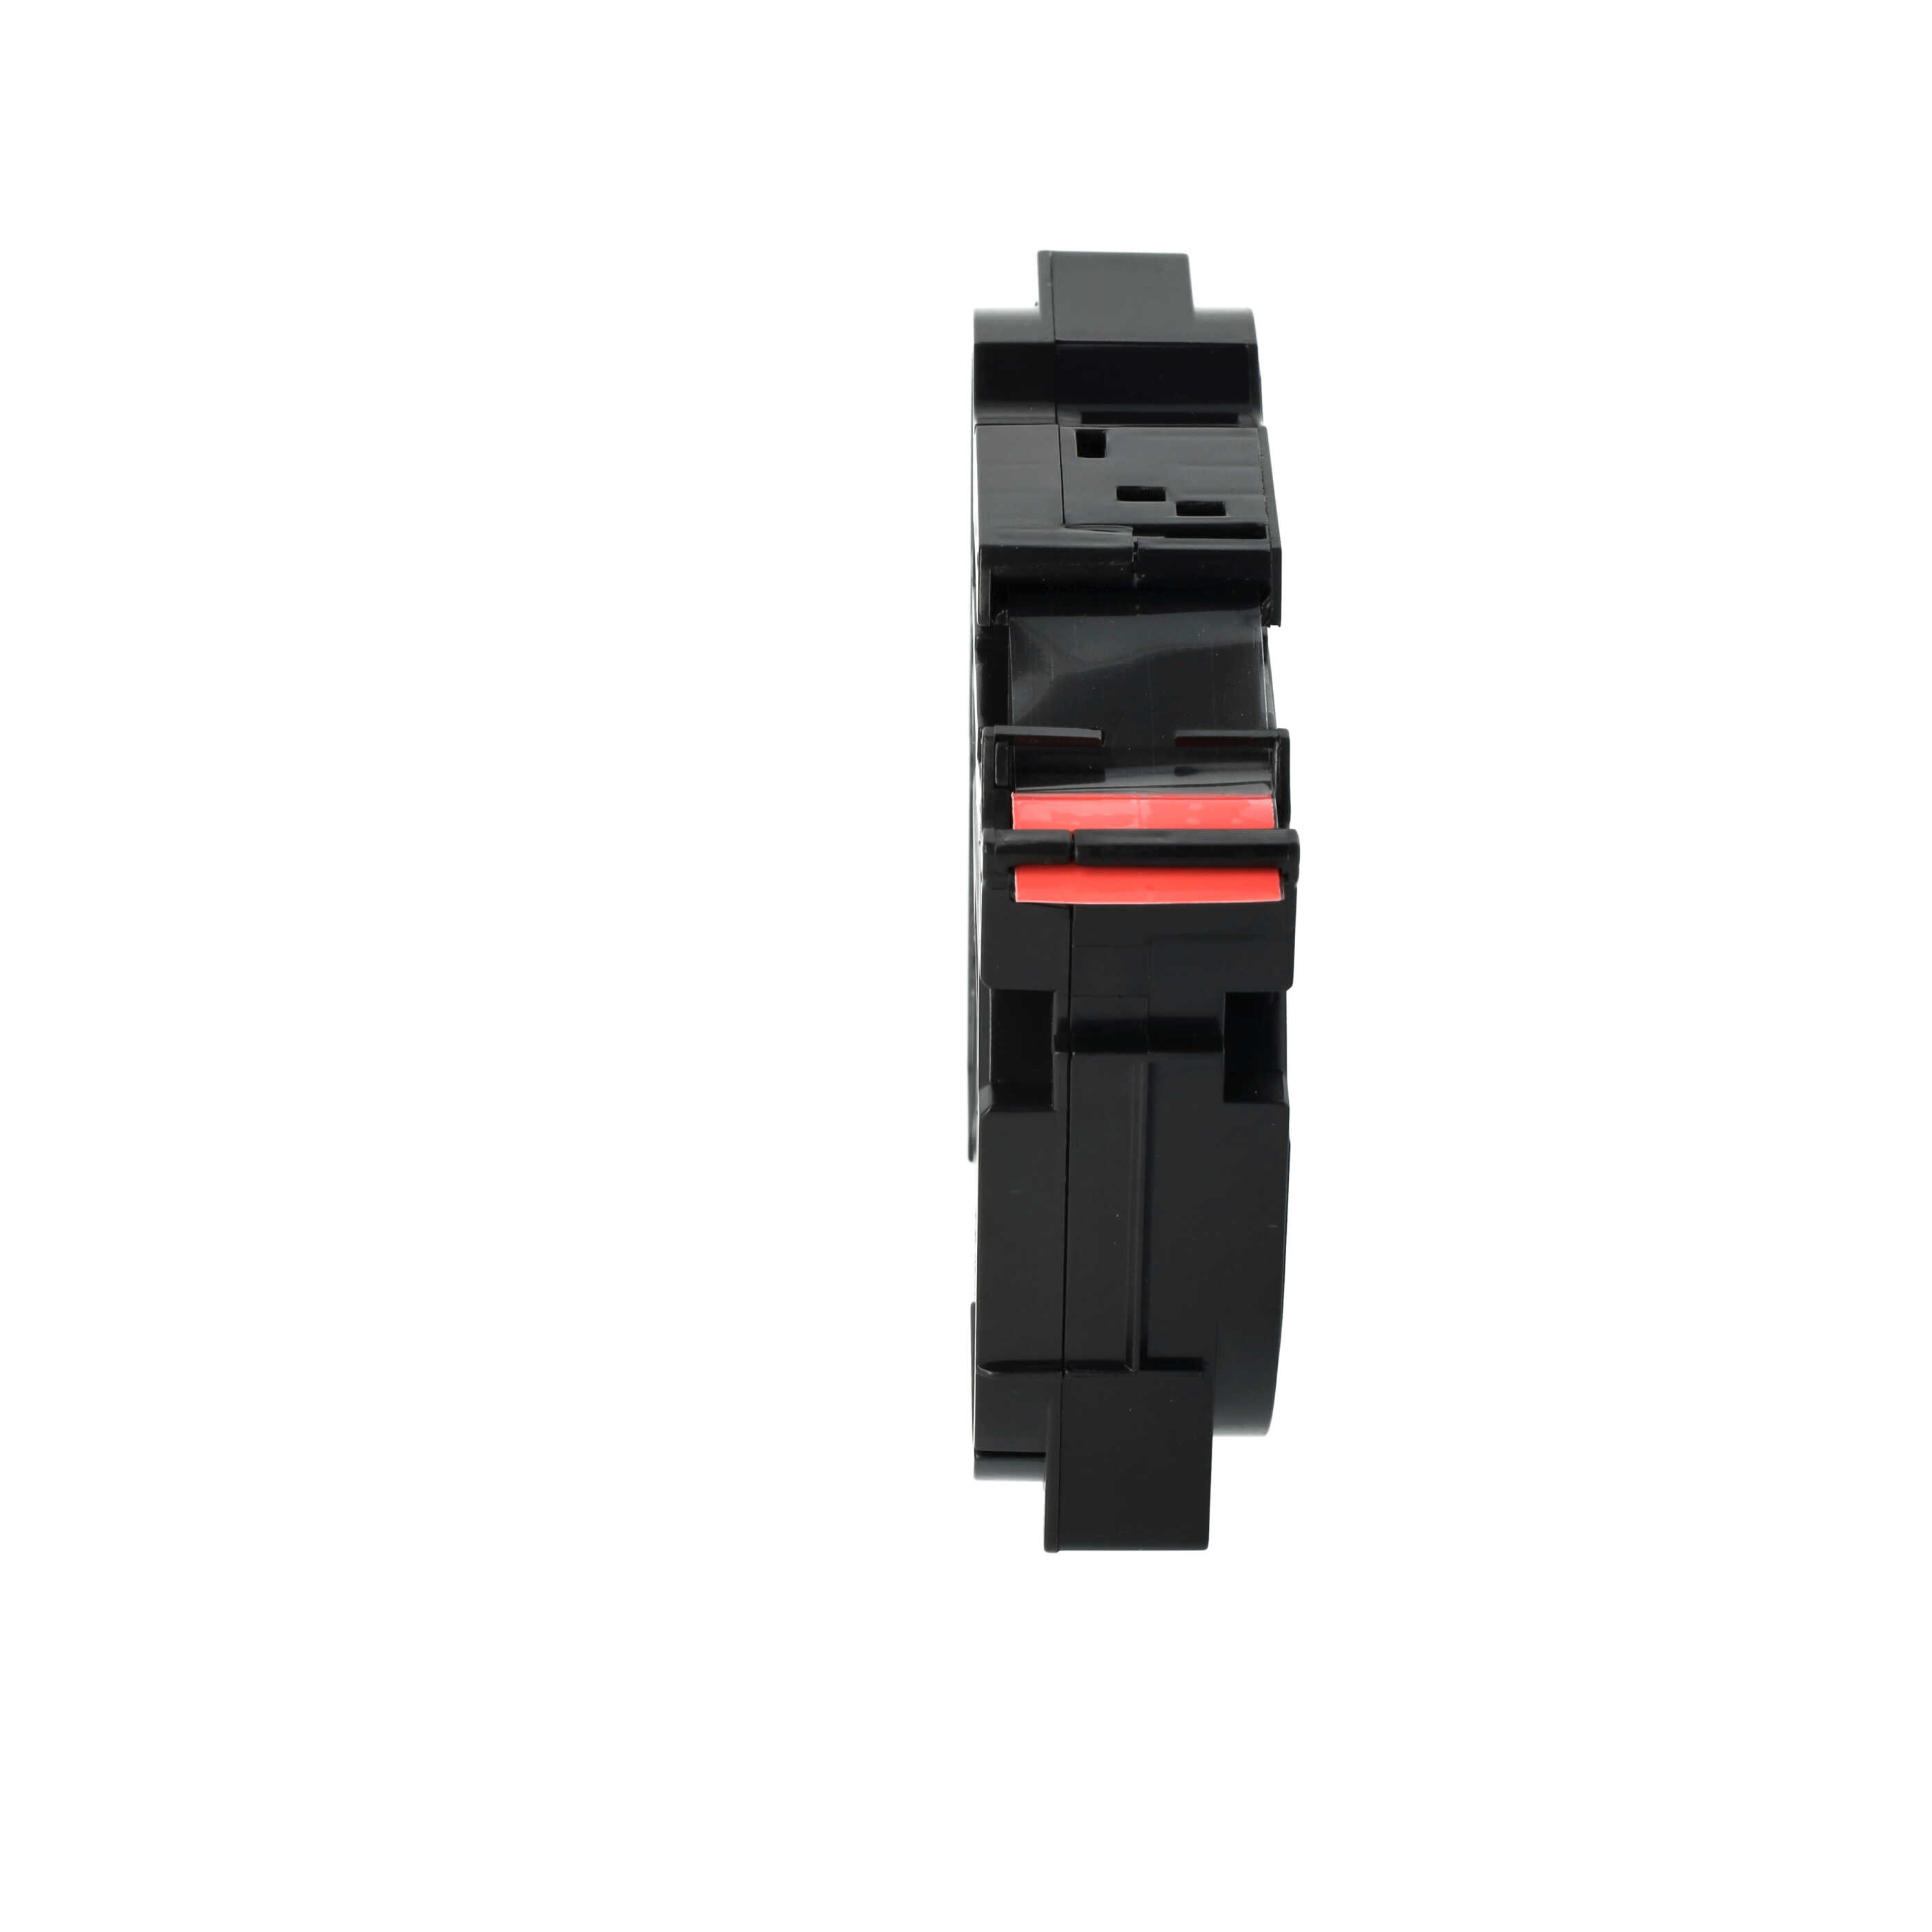 Label Tape as Replacement for Brother TZFX441, TZeFX441, TZ-FX441, TZE-FX441 - 18 mm Black to Red, Flexible